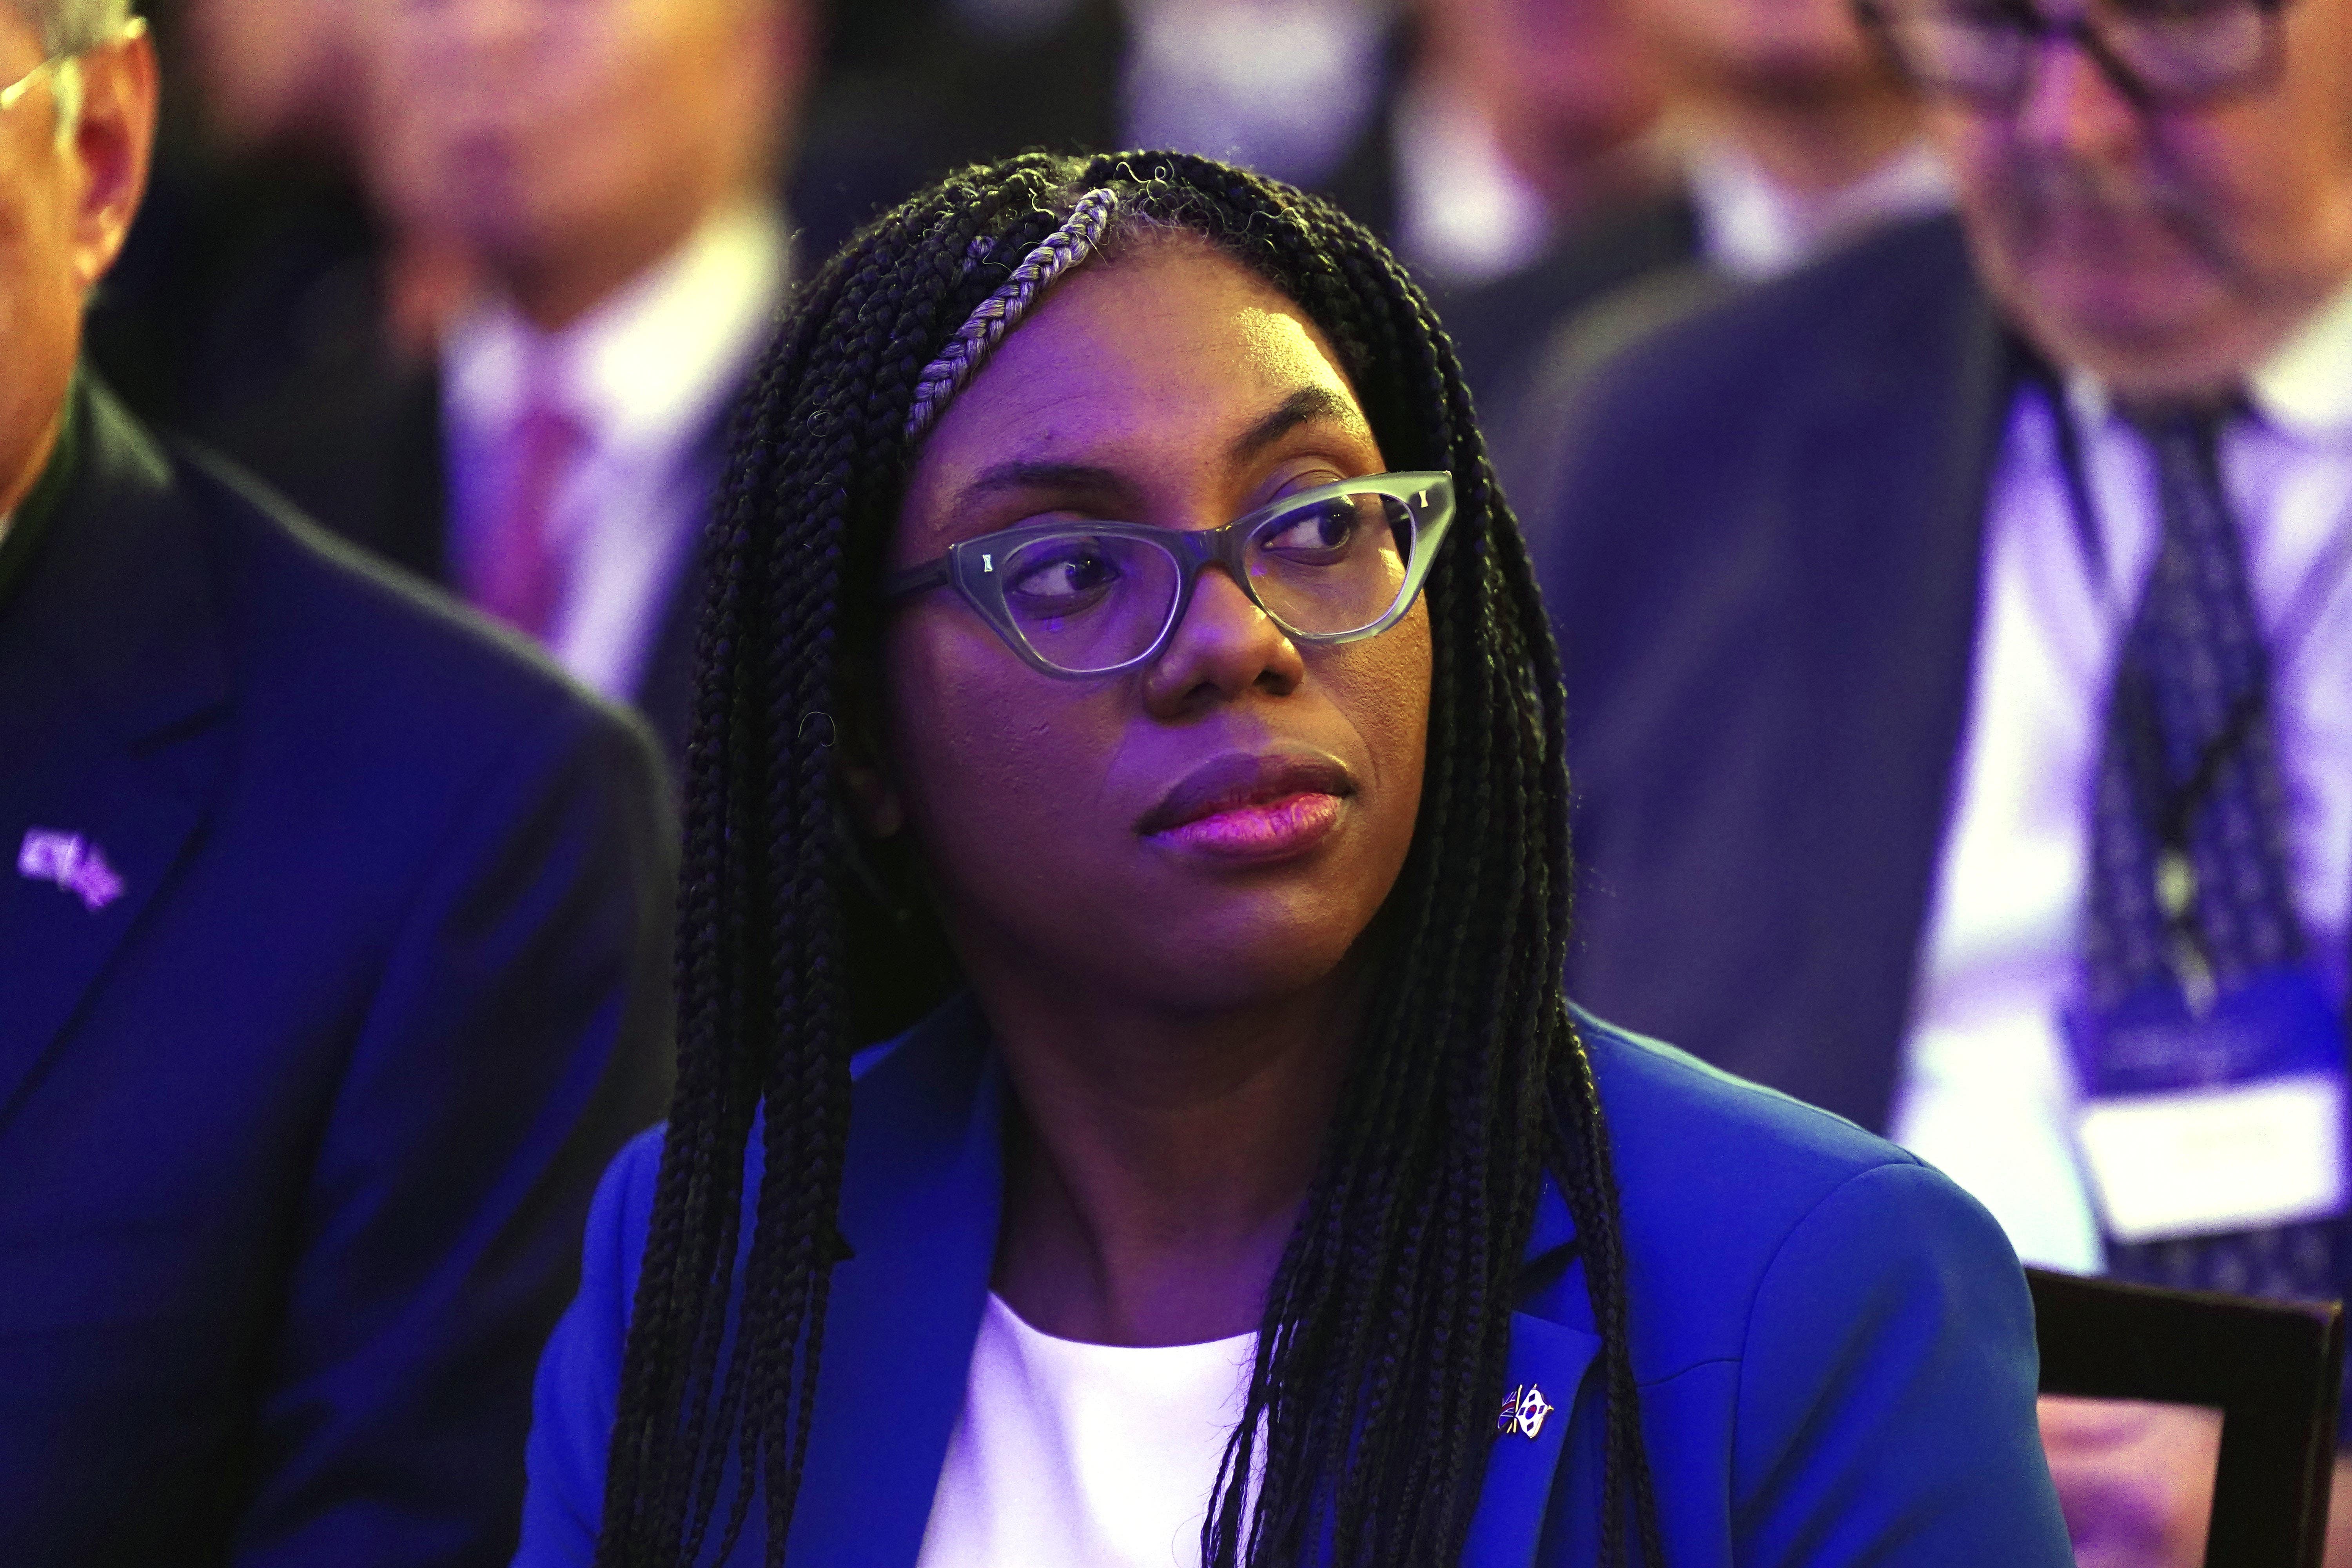 Kemi Badenoch said to be member of an ‘Evil Plotters’ WhatsApp group